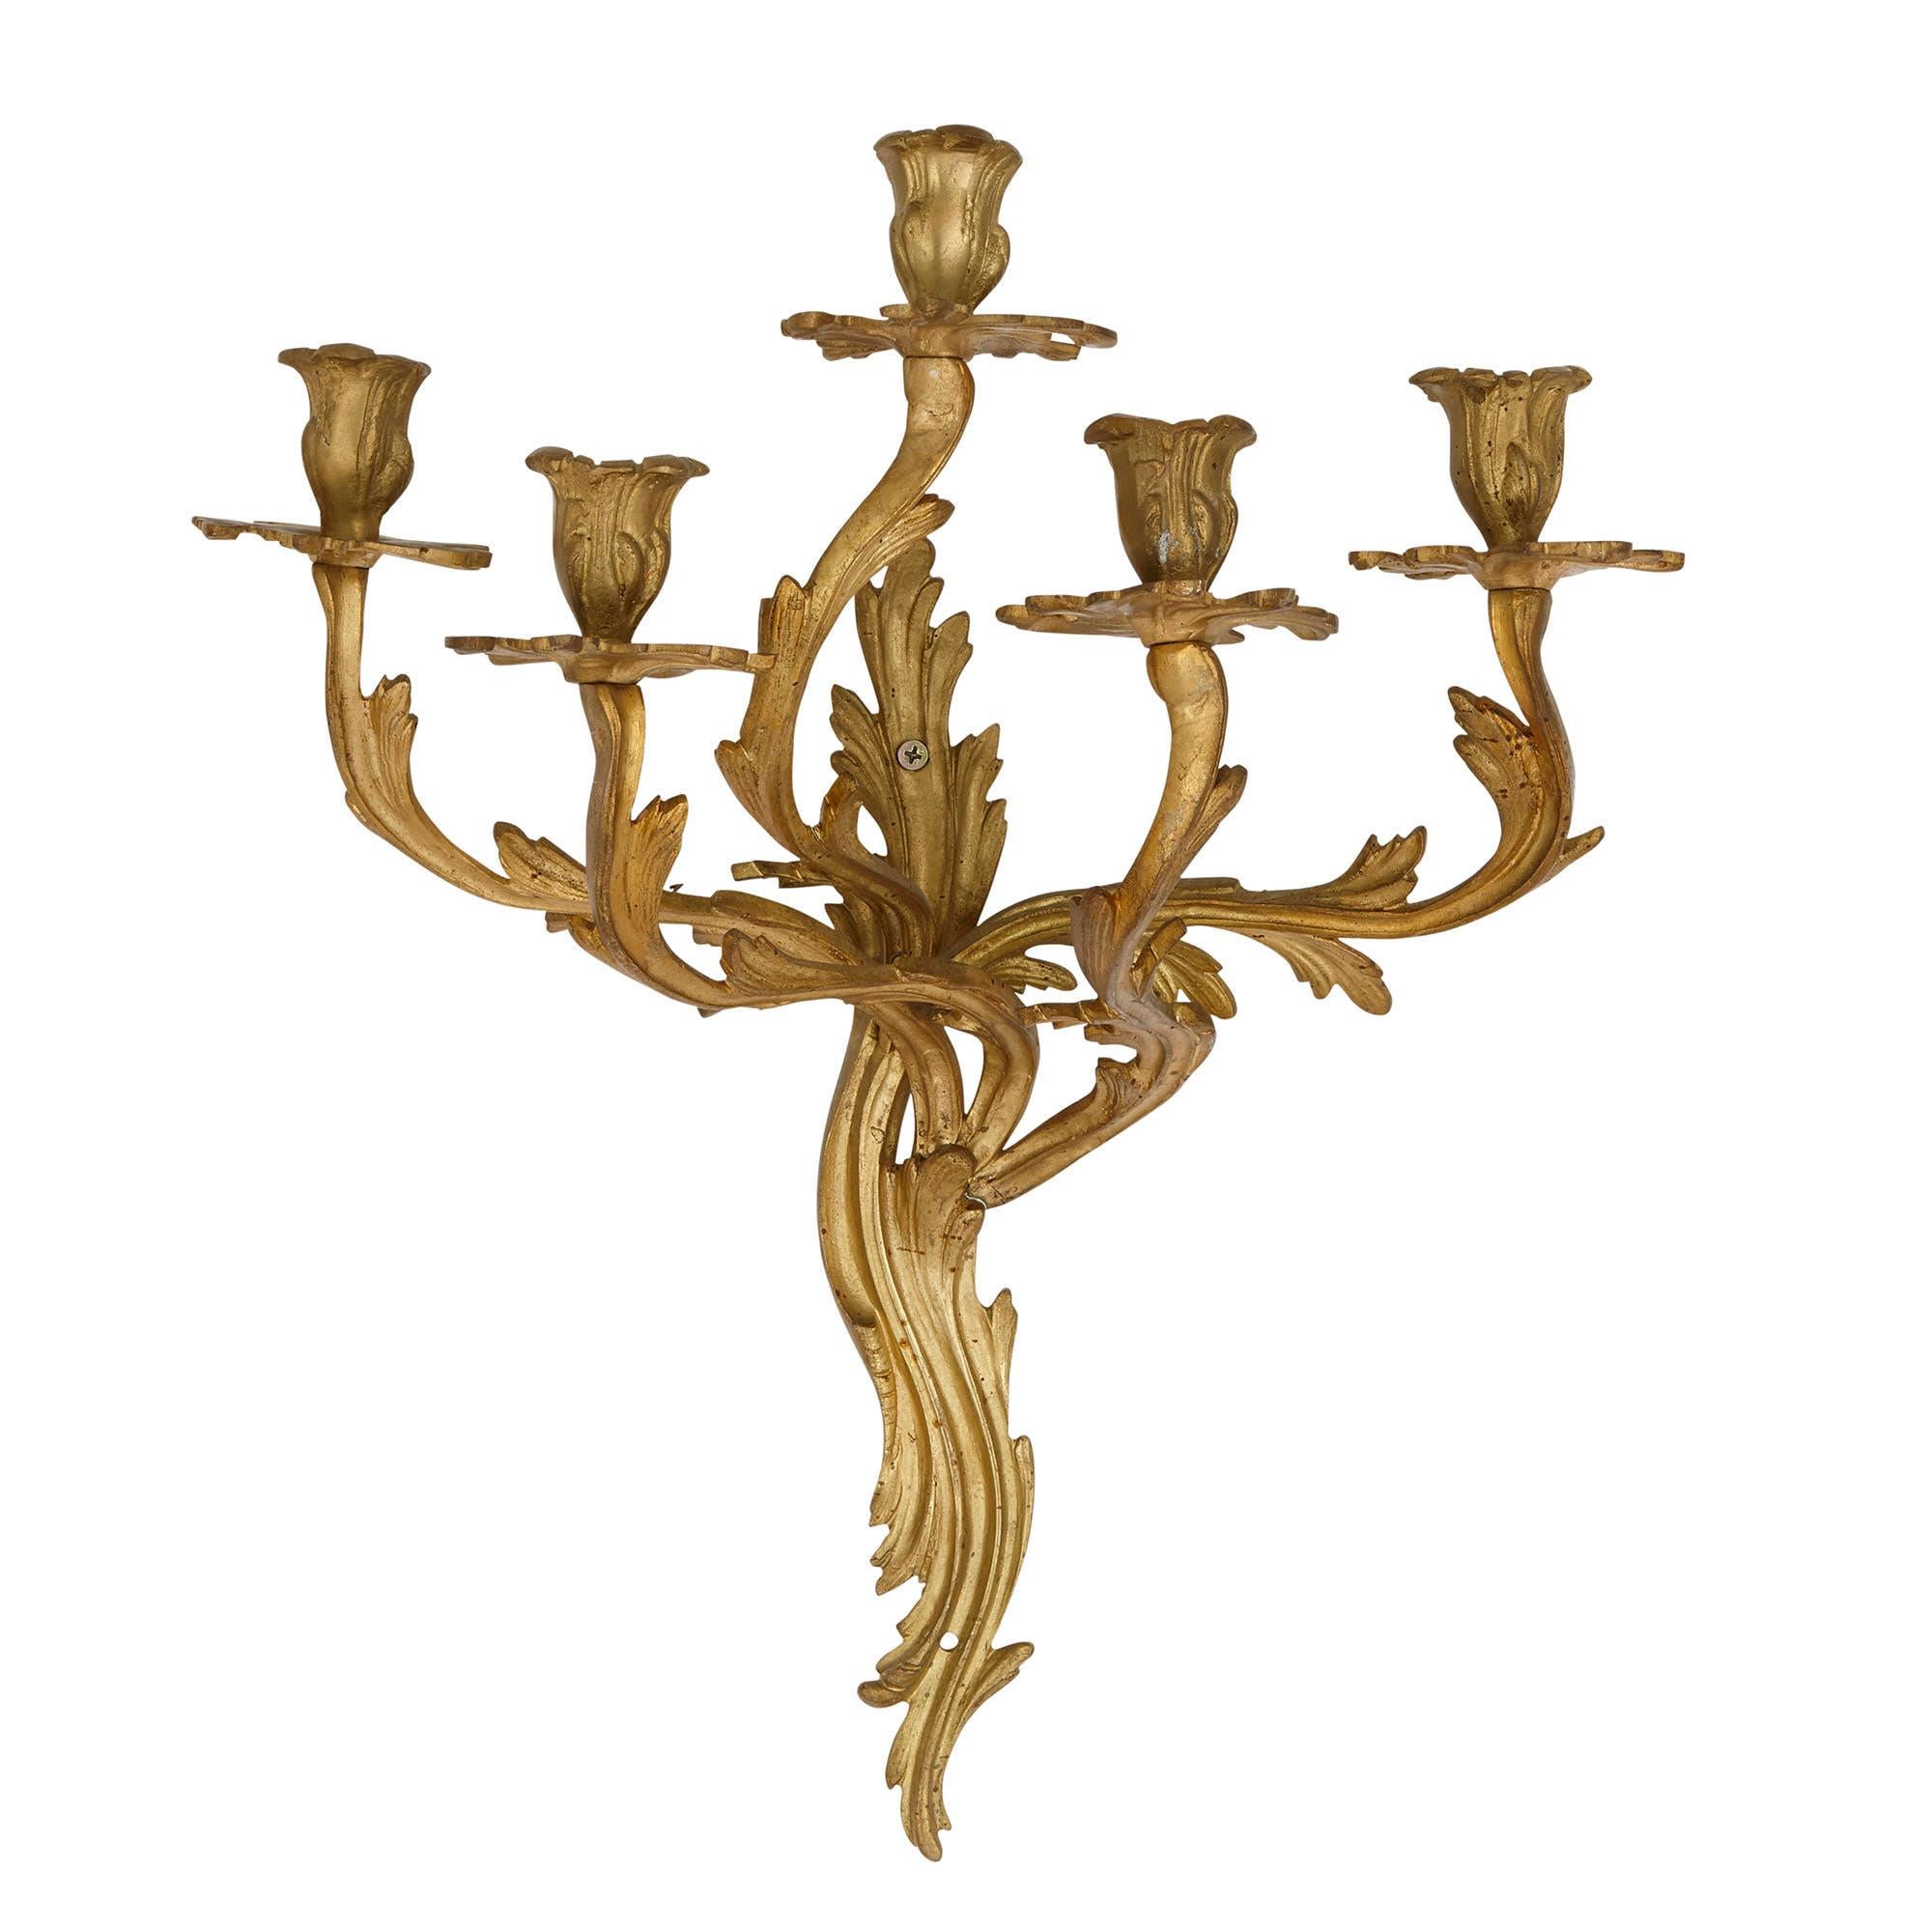 These beautiful gilt bronze (ormolu) wall sconces (lights) are designed in an elegant Rococo style after decorative arts of the Louis XV period (1715-1774). Characteristic of this style, they are composed of curved, asymmetrical organic forms.